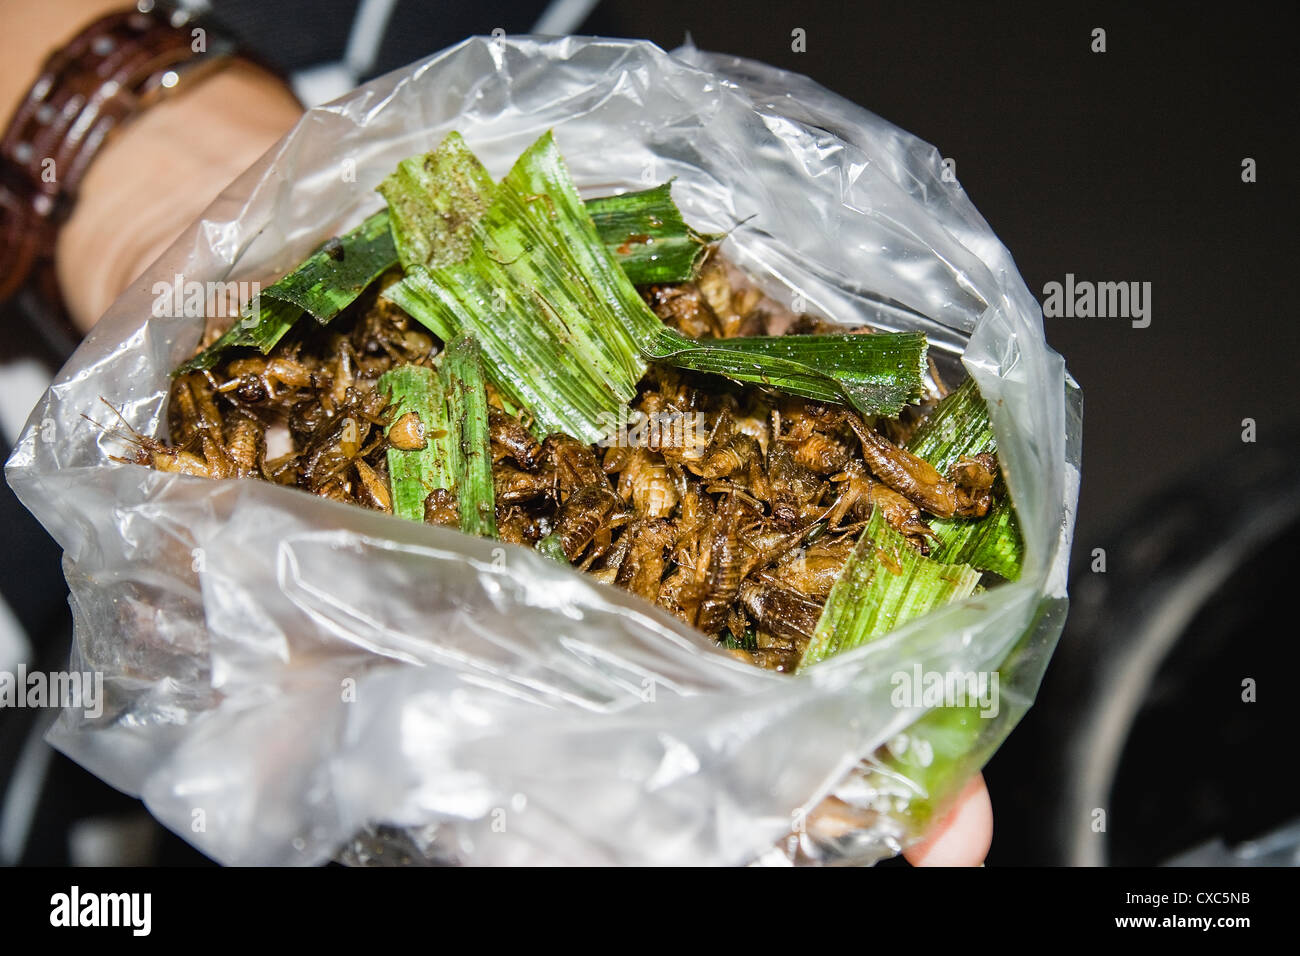 Plastic bag full of edible insects in Thailand Stock Photo